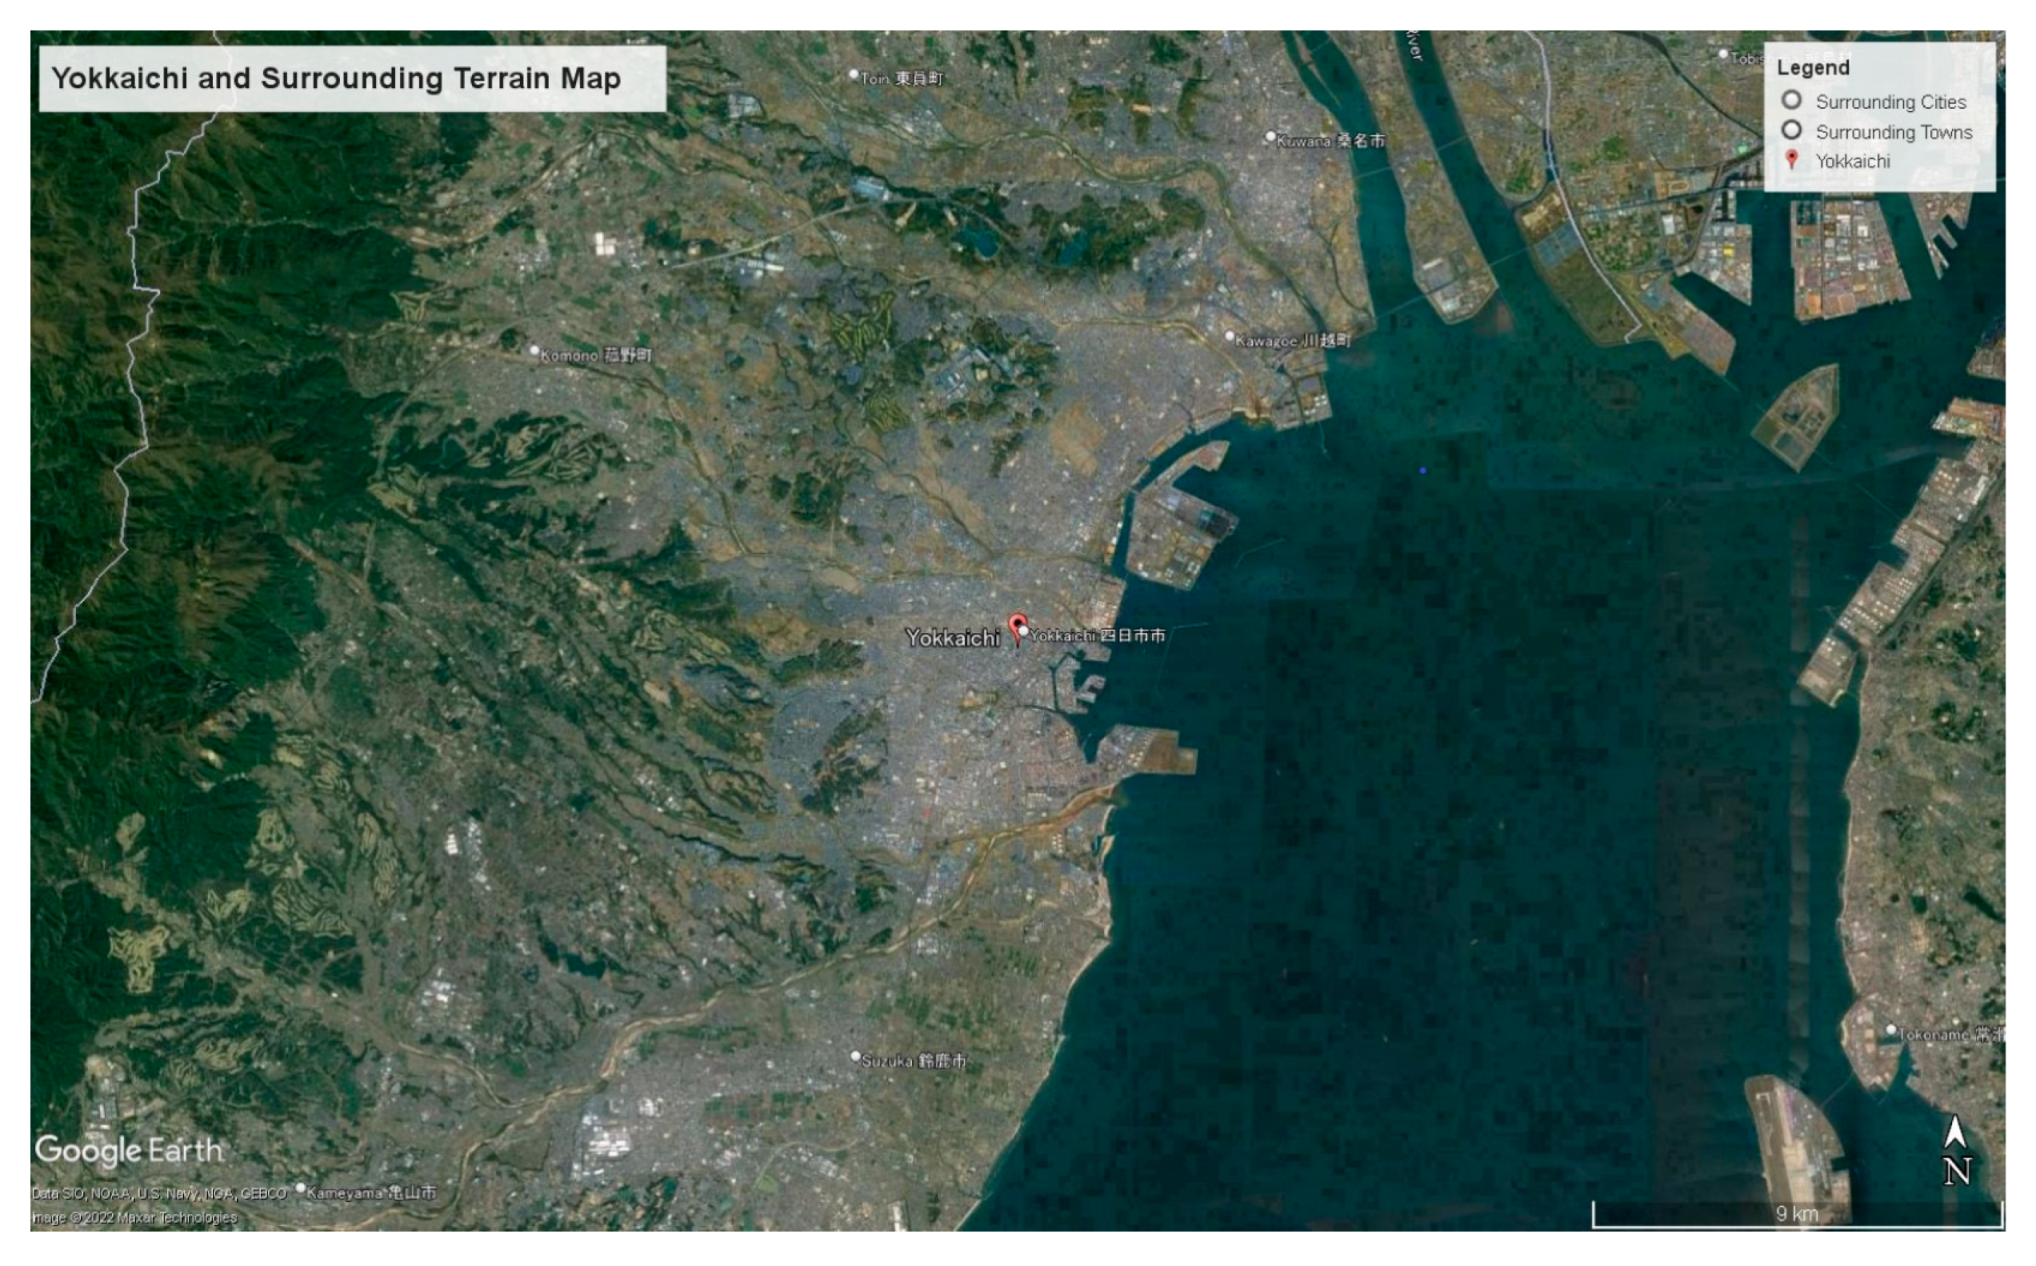 San Diego Bay Watersheds - Common Ground- Historical Timeline 1970-1990